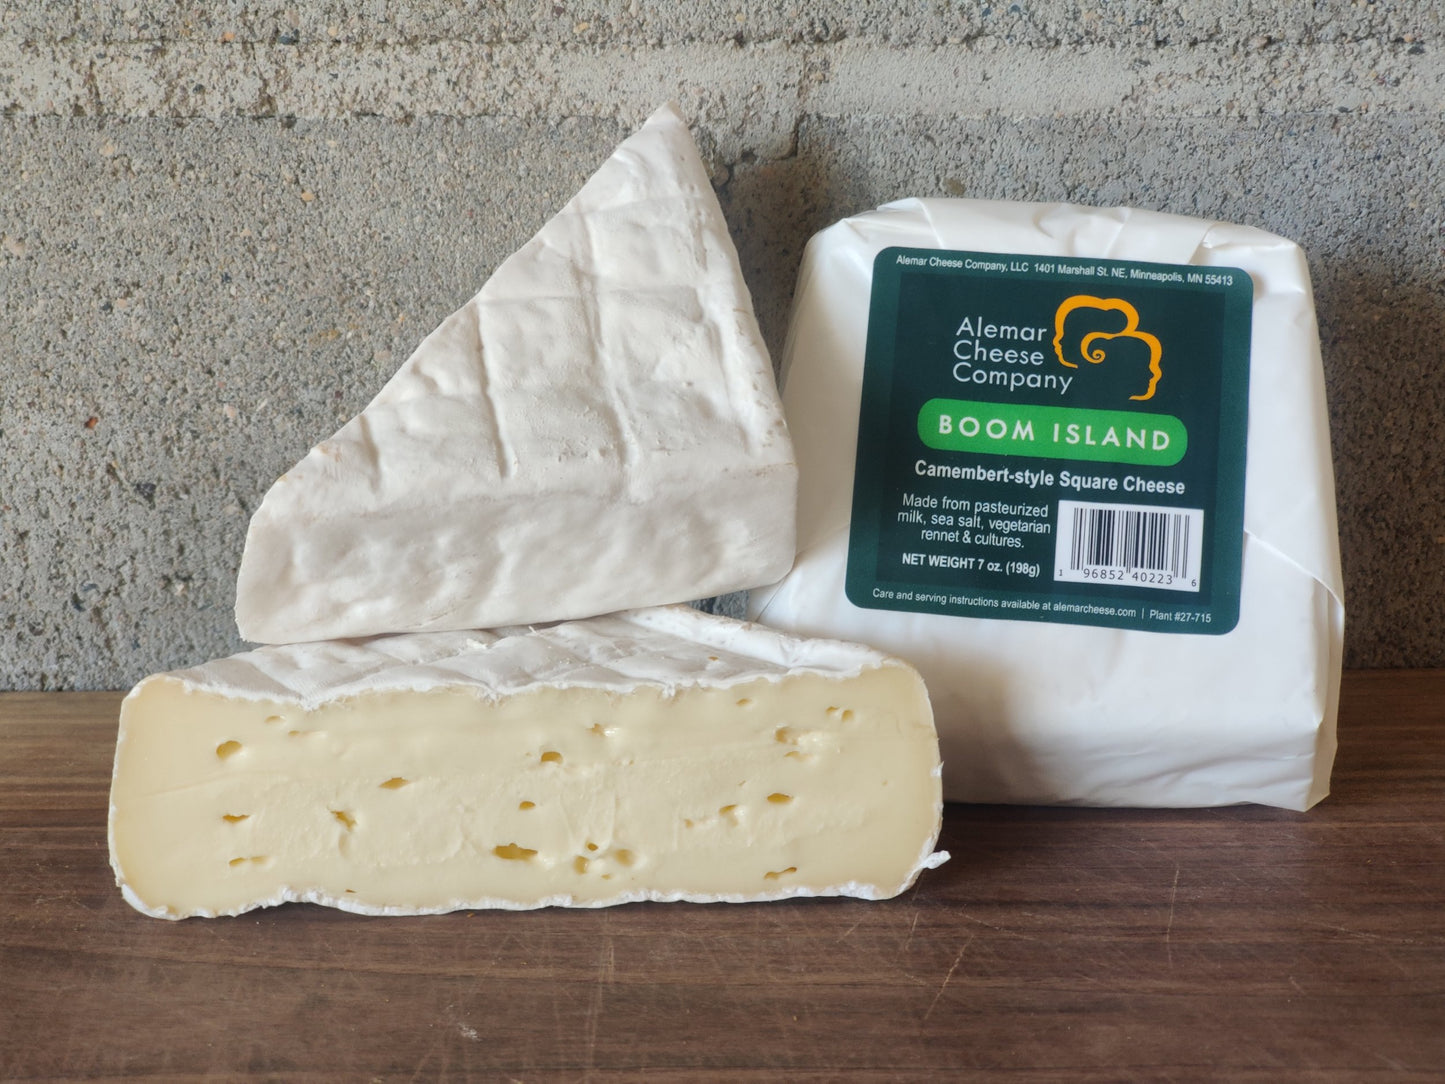 Package of Boom Island cheese from Alemar Cheese Company